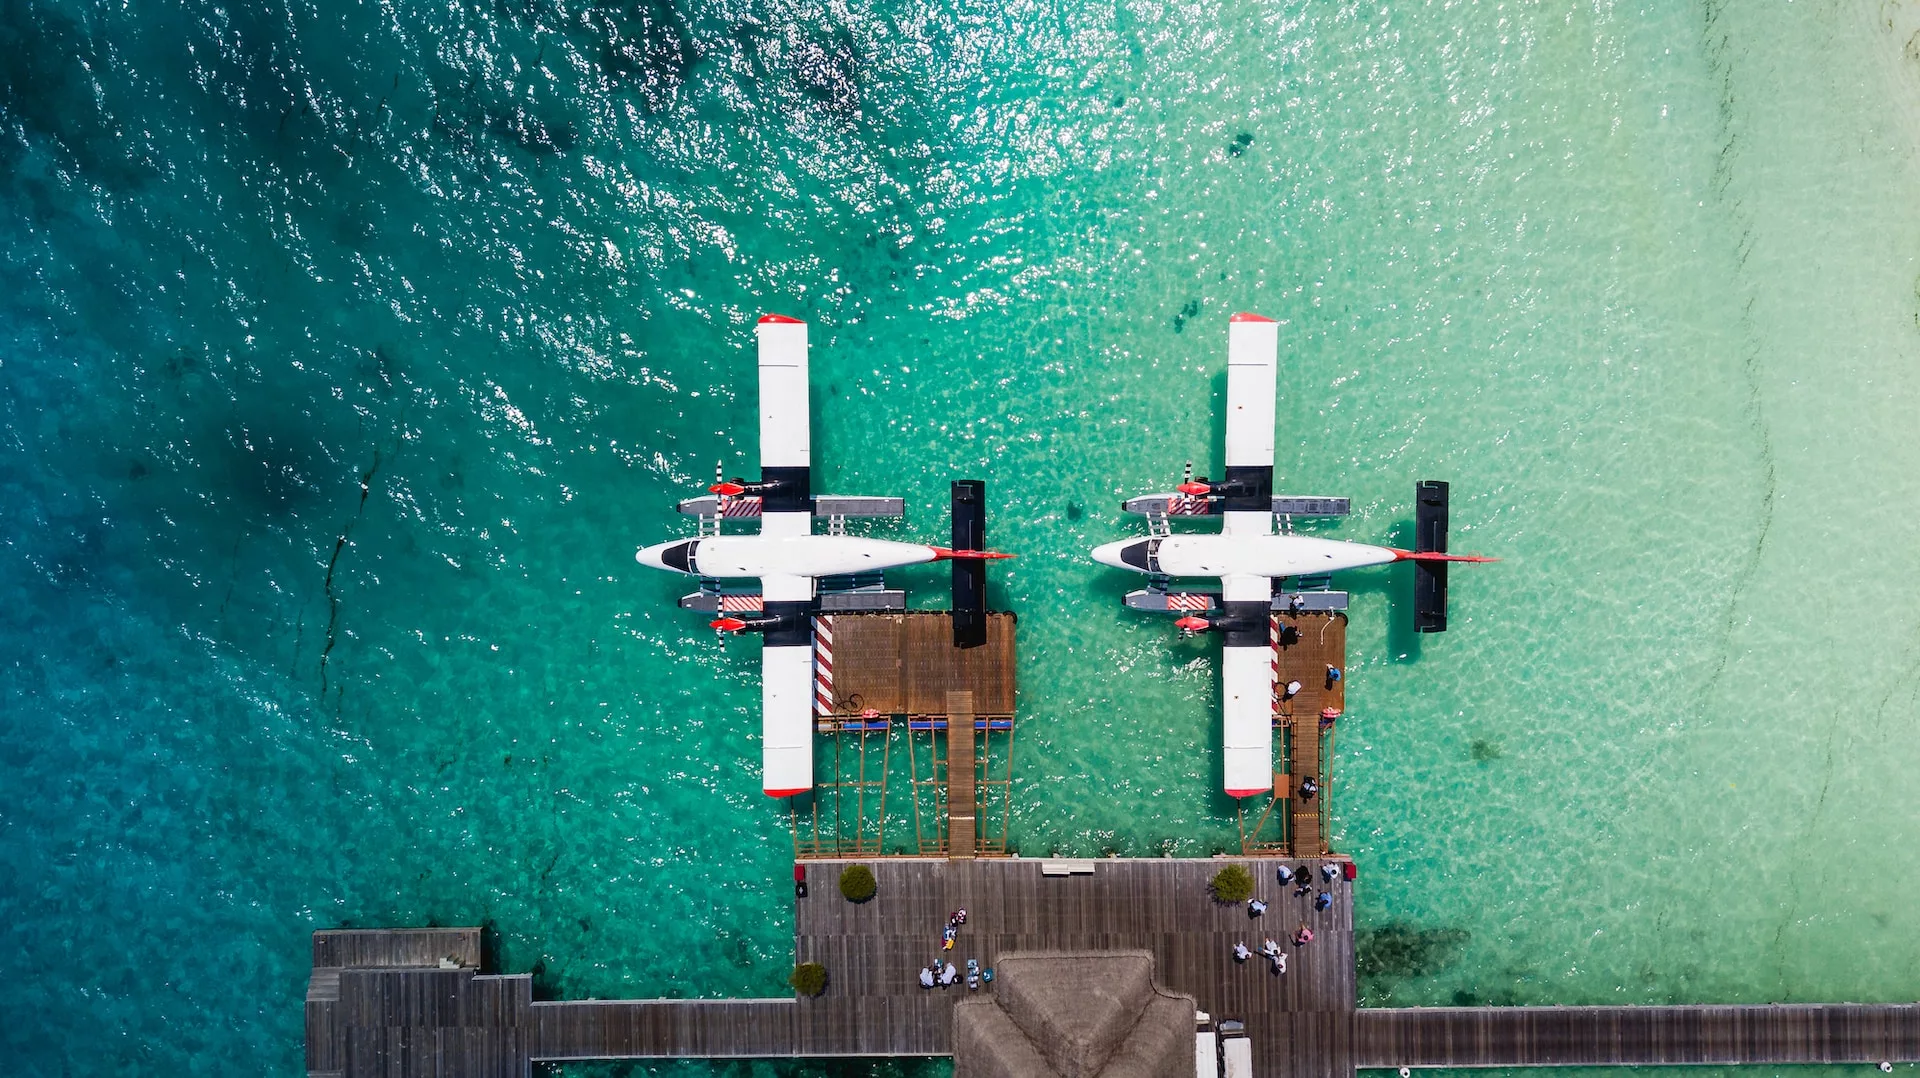 Two identical twin water-landing jets docked by the ocean.